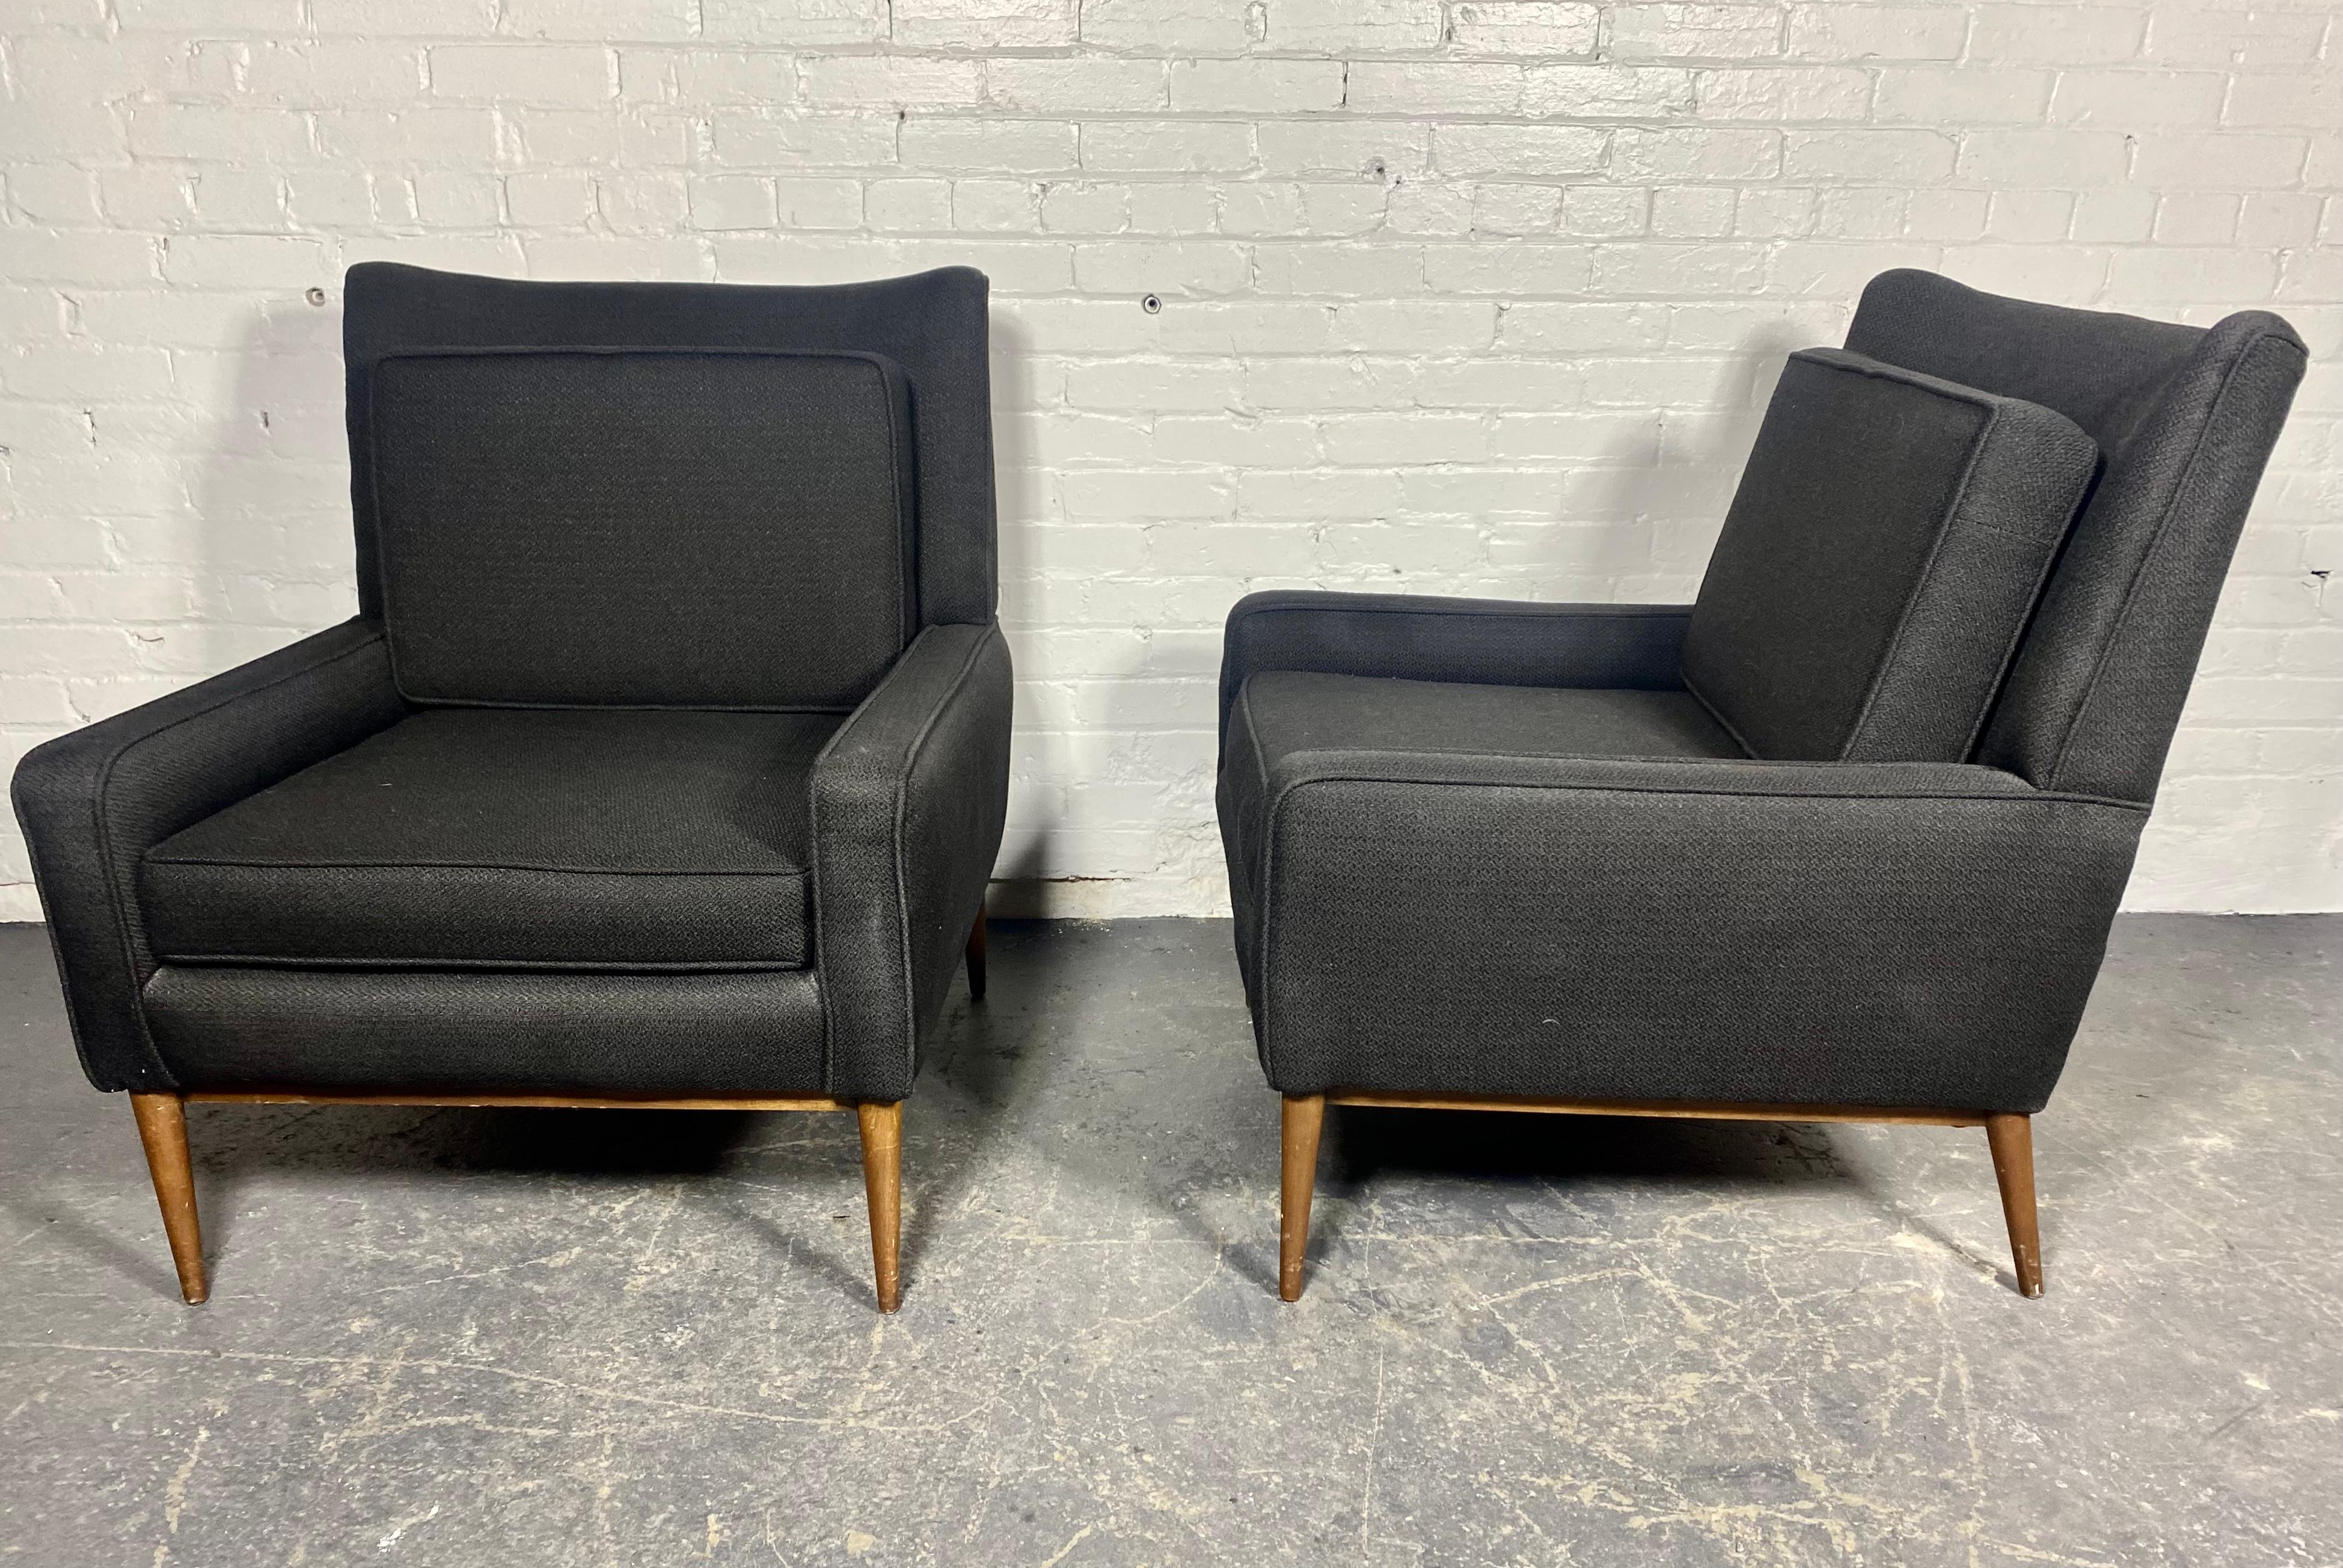 Classic Pair Modernist Lounge Chairs attributed to Paul McCobb / Directional For Sale 1